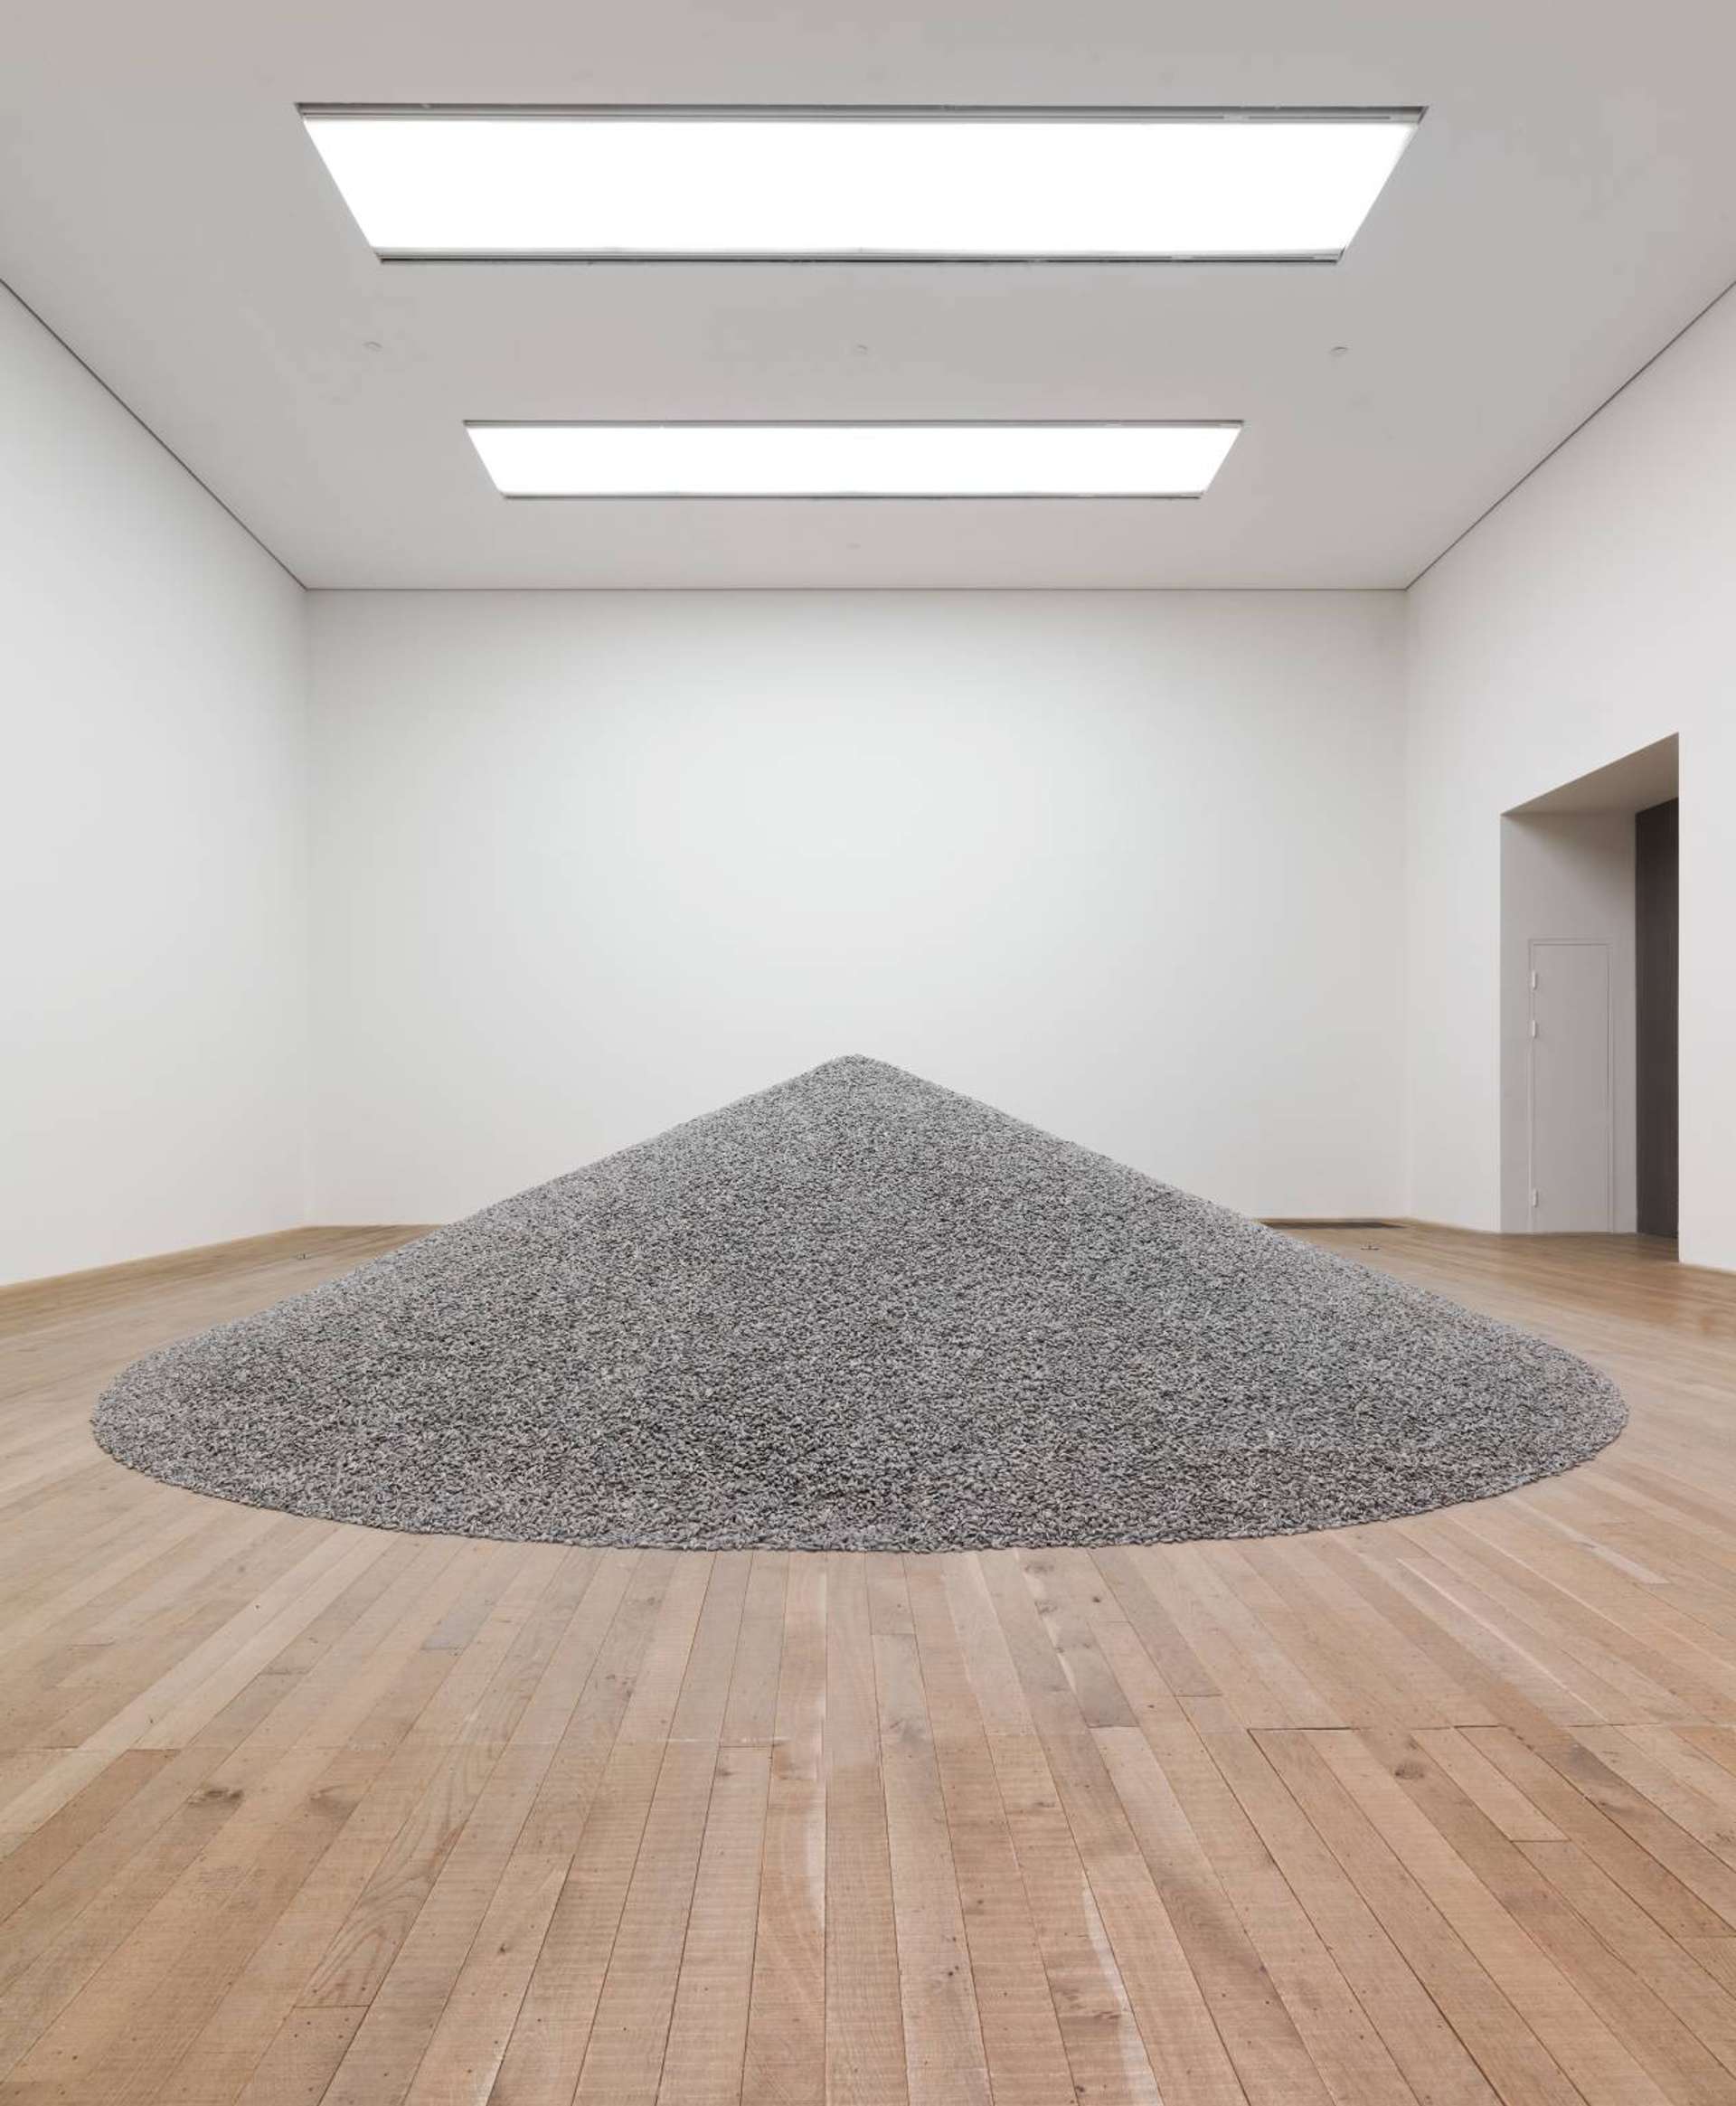 A pile of sunflower seeds on a wooden floor inside a white room